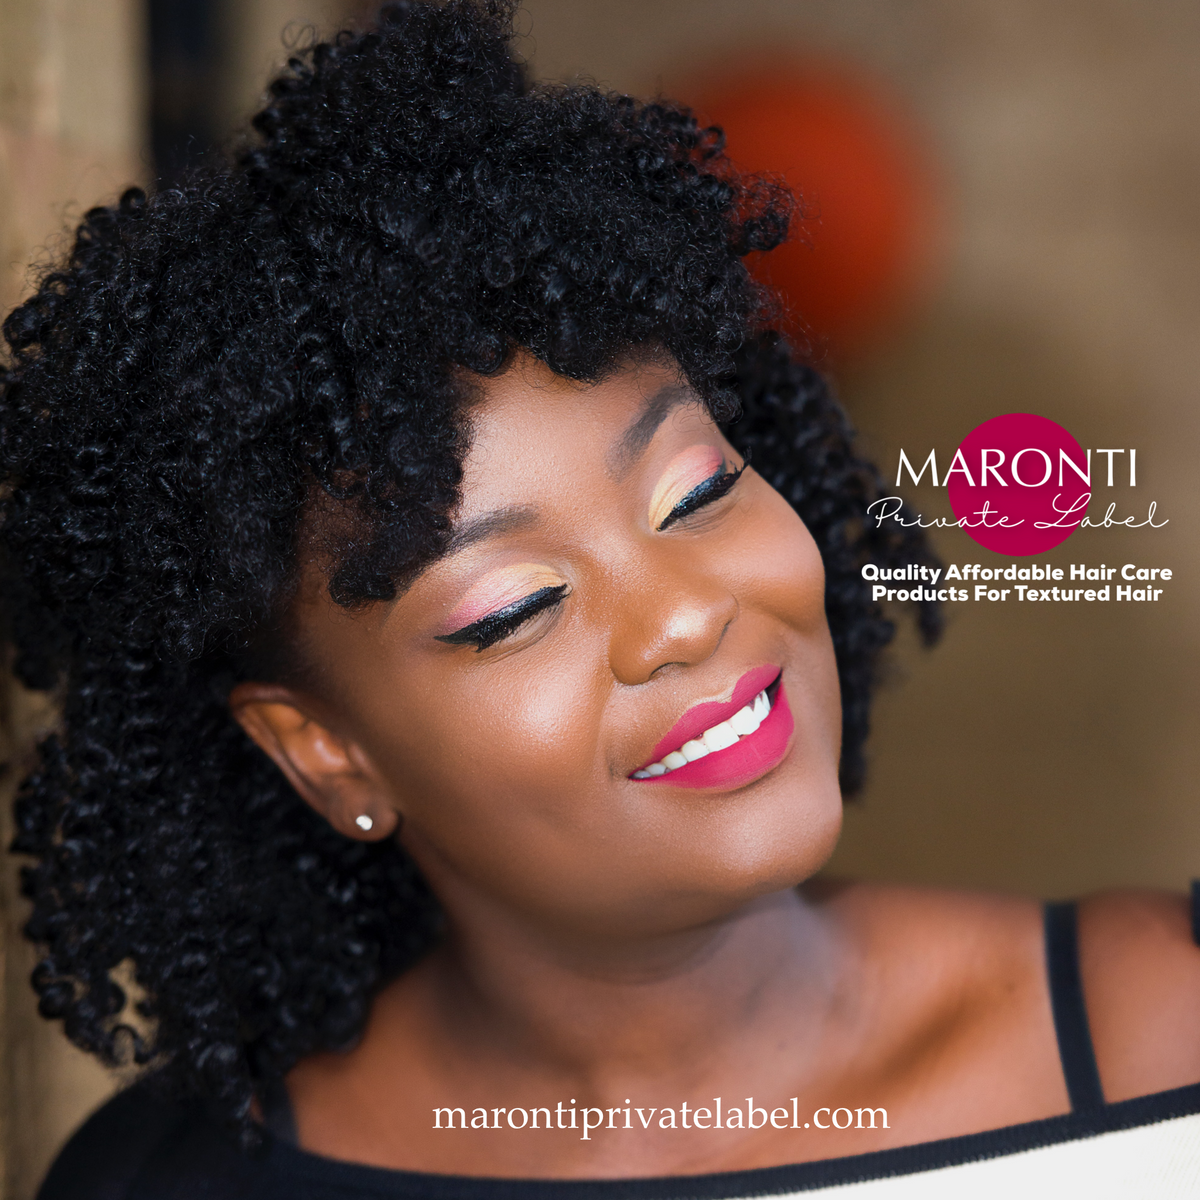 Maronti Private Label For Textured Hair